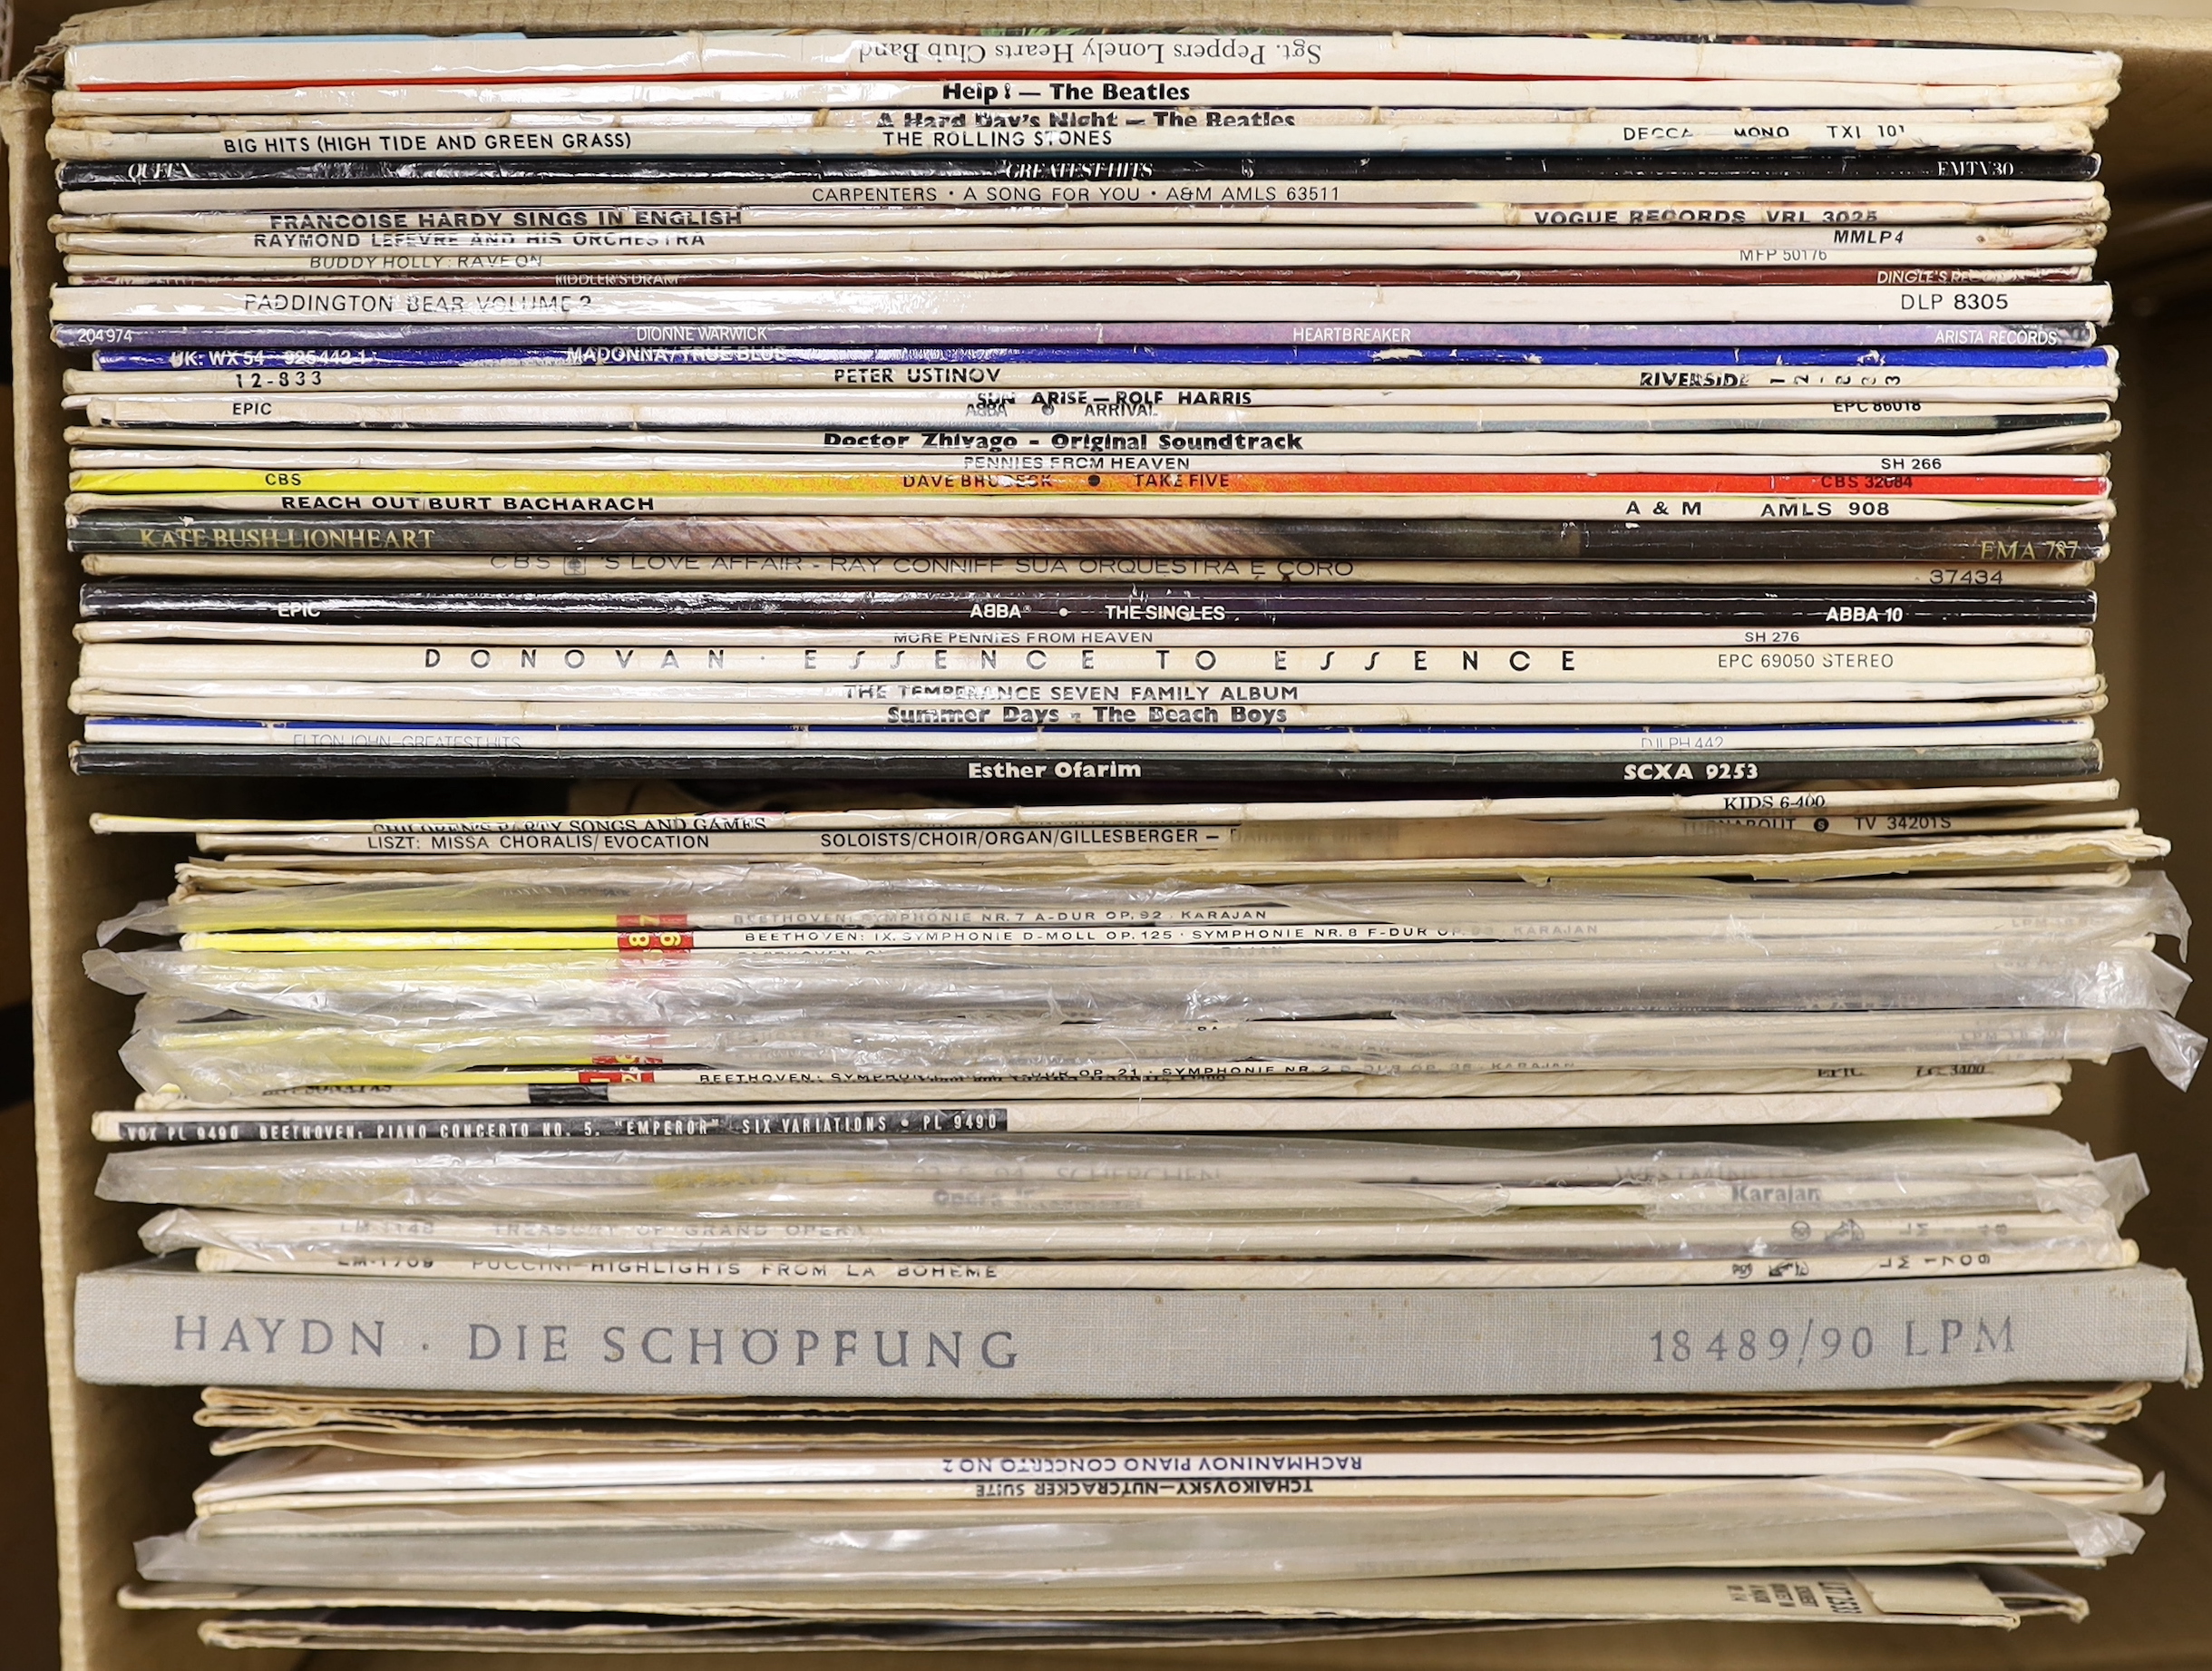 A collection of LPs including 1970's rock, classical recordings, box sets, etc, including; The Beatles, Queen, The Carpenters, Dionne Warwick, ABBA, Dave Brubeck, The Beach Boys, Haydn symphonies, Beethoven symphonies, o